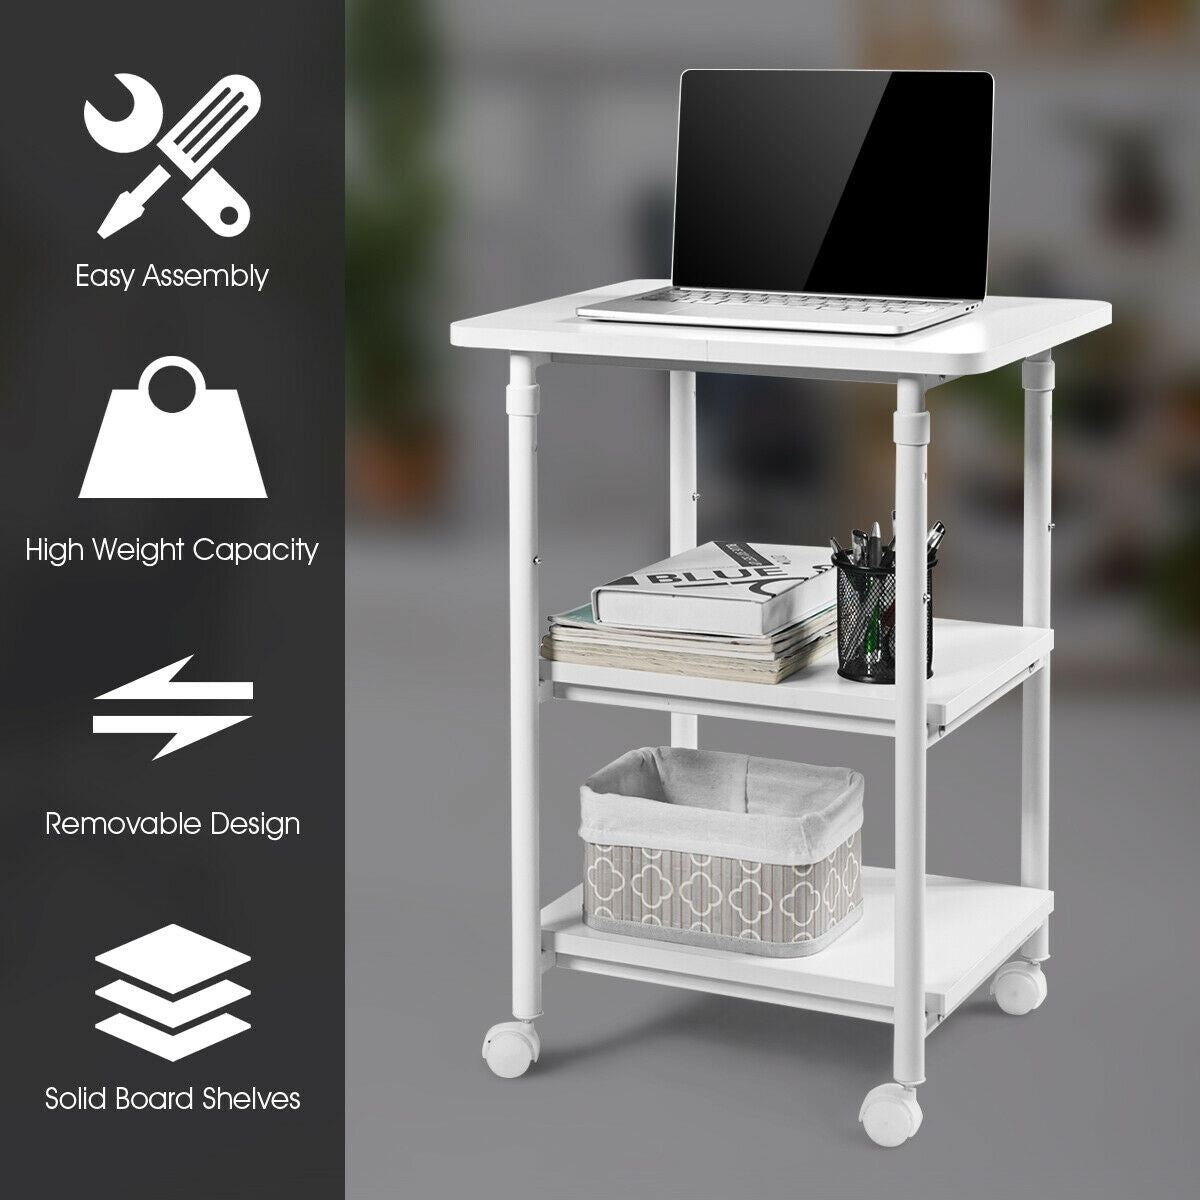 3-tier Adjustable Printer Stand with 360° Swivel Casters-White